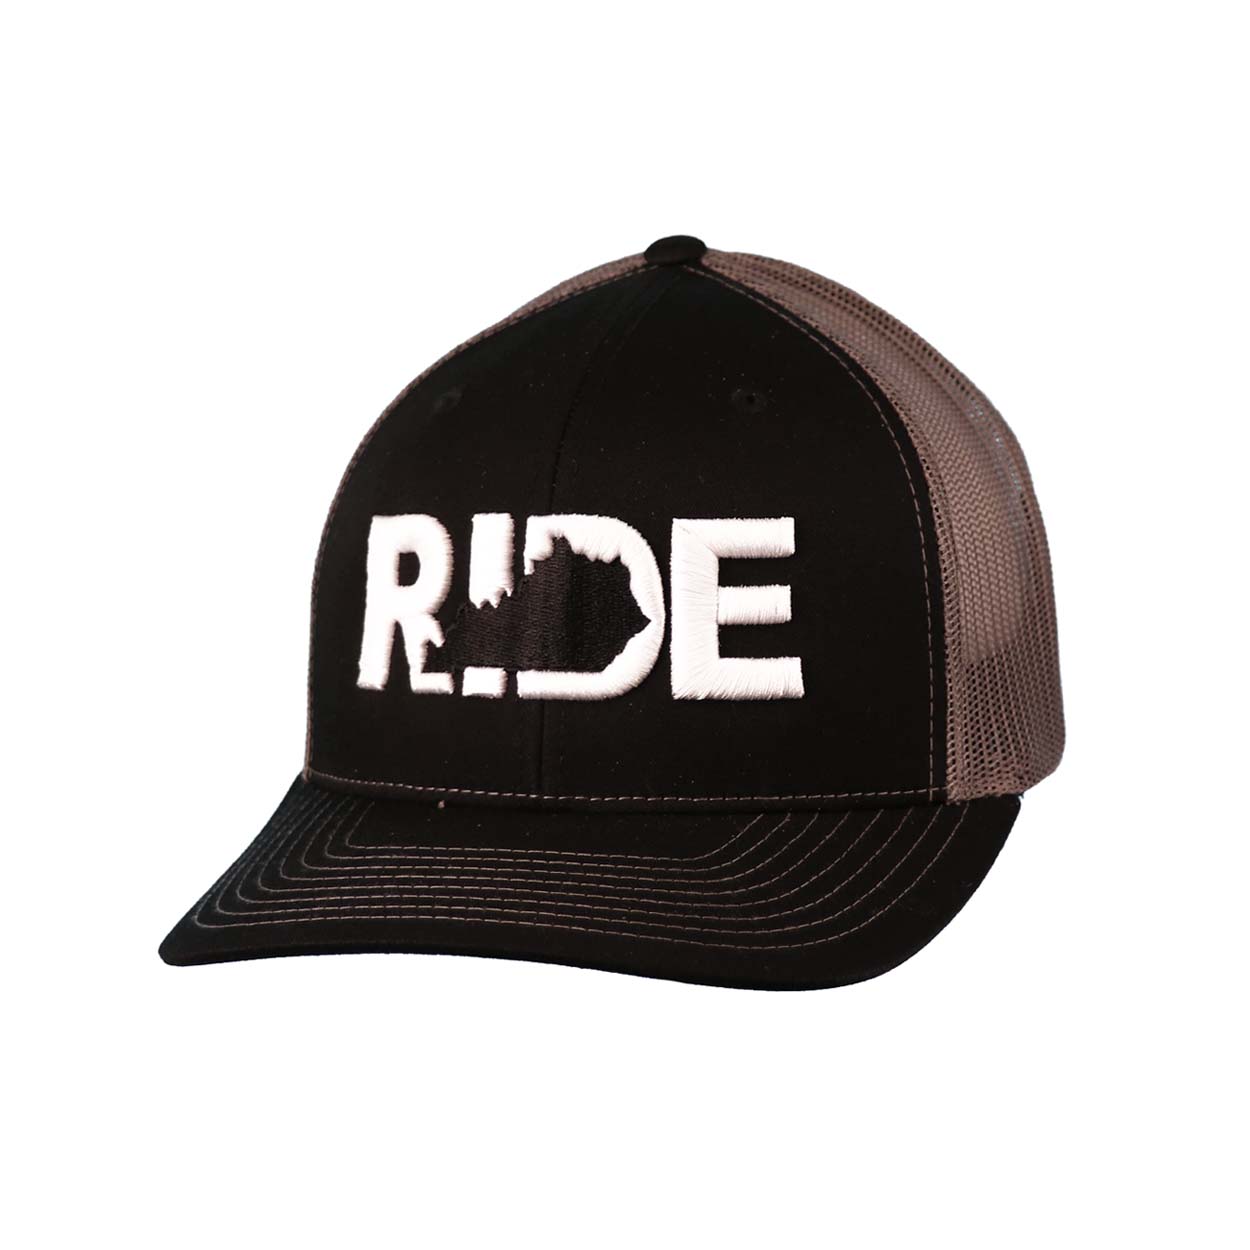 Ride Kentucky Classic Embroidered Snapback Trucker Hat Black/Gray